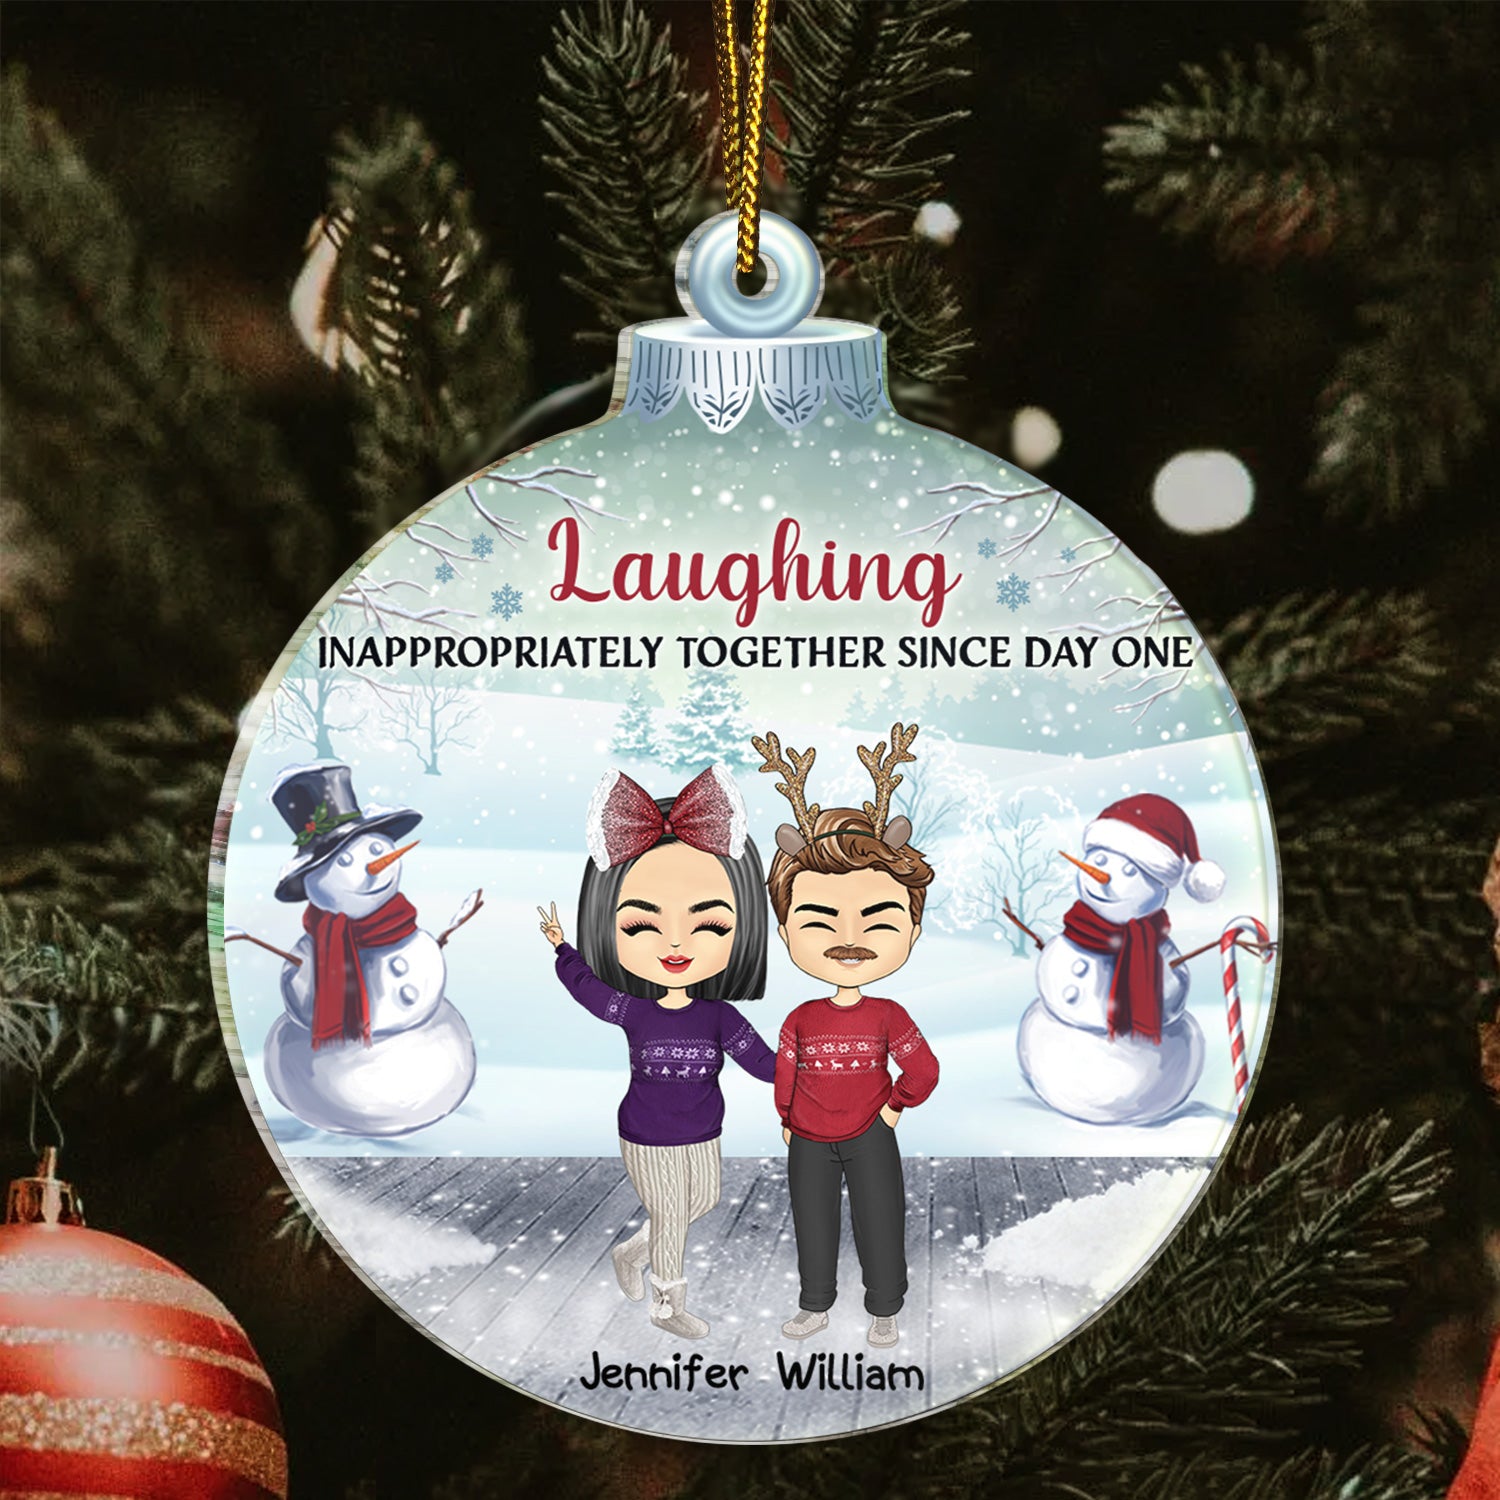 Good Gifts for Friends at Christmas – Fun-Squared